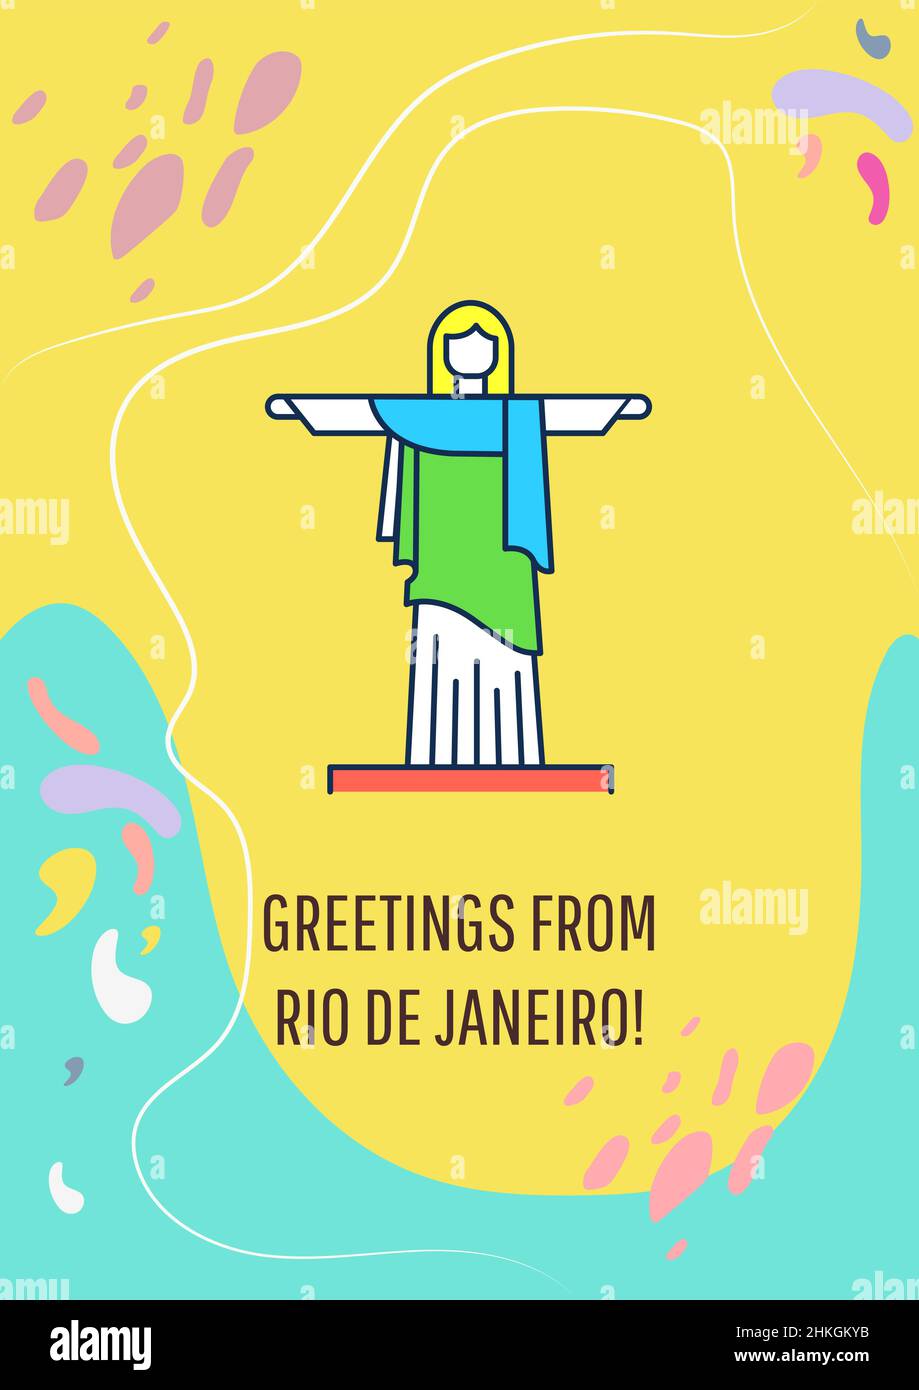 Greetings from Rio de Janeiro greeting card with color icon element Stock Vector